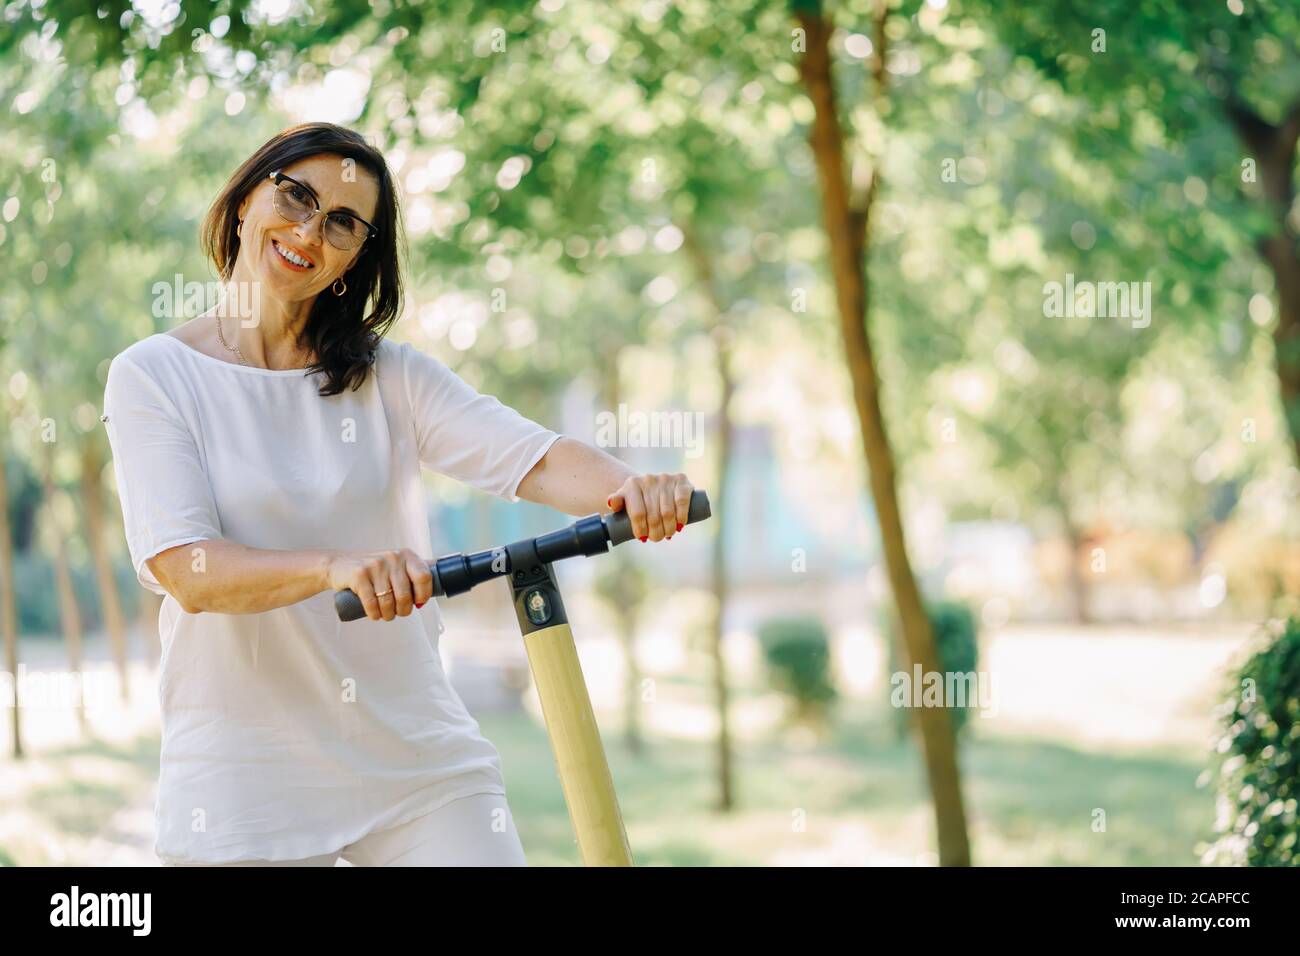 Close up Joyful adorable senior woman using a scooter while riding in the park. Modern woman, a new generation. Healthy cheerful senior retired lady Stock Photo